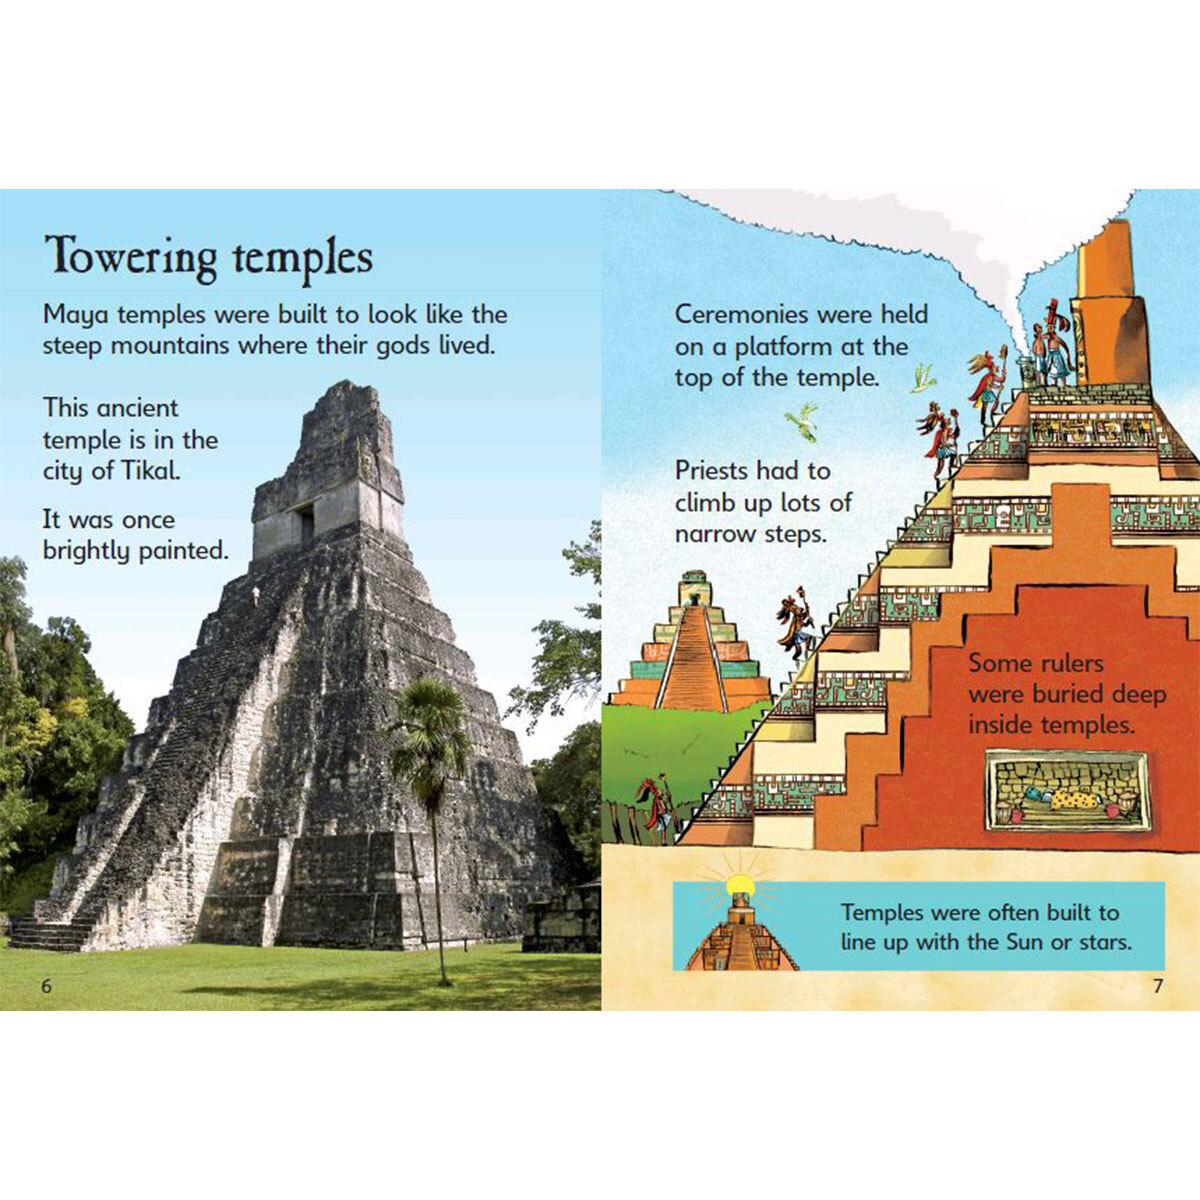 Towering temples page spread